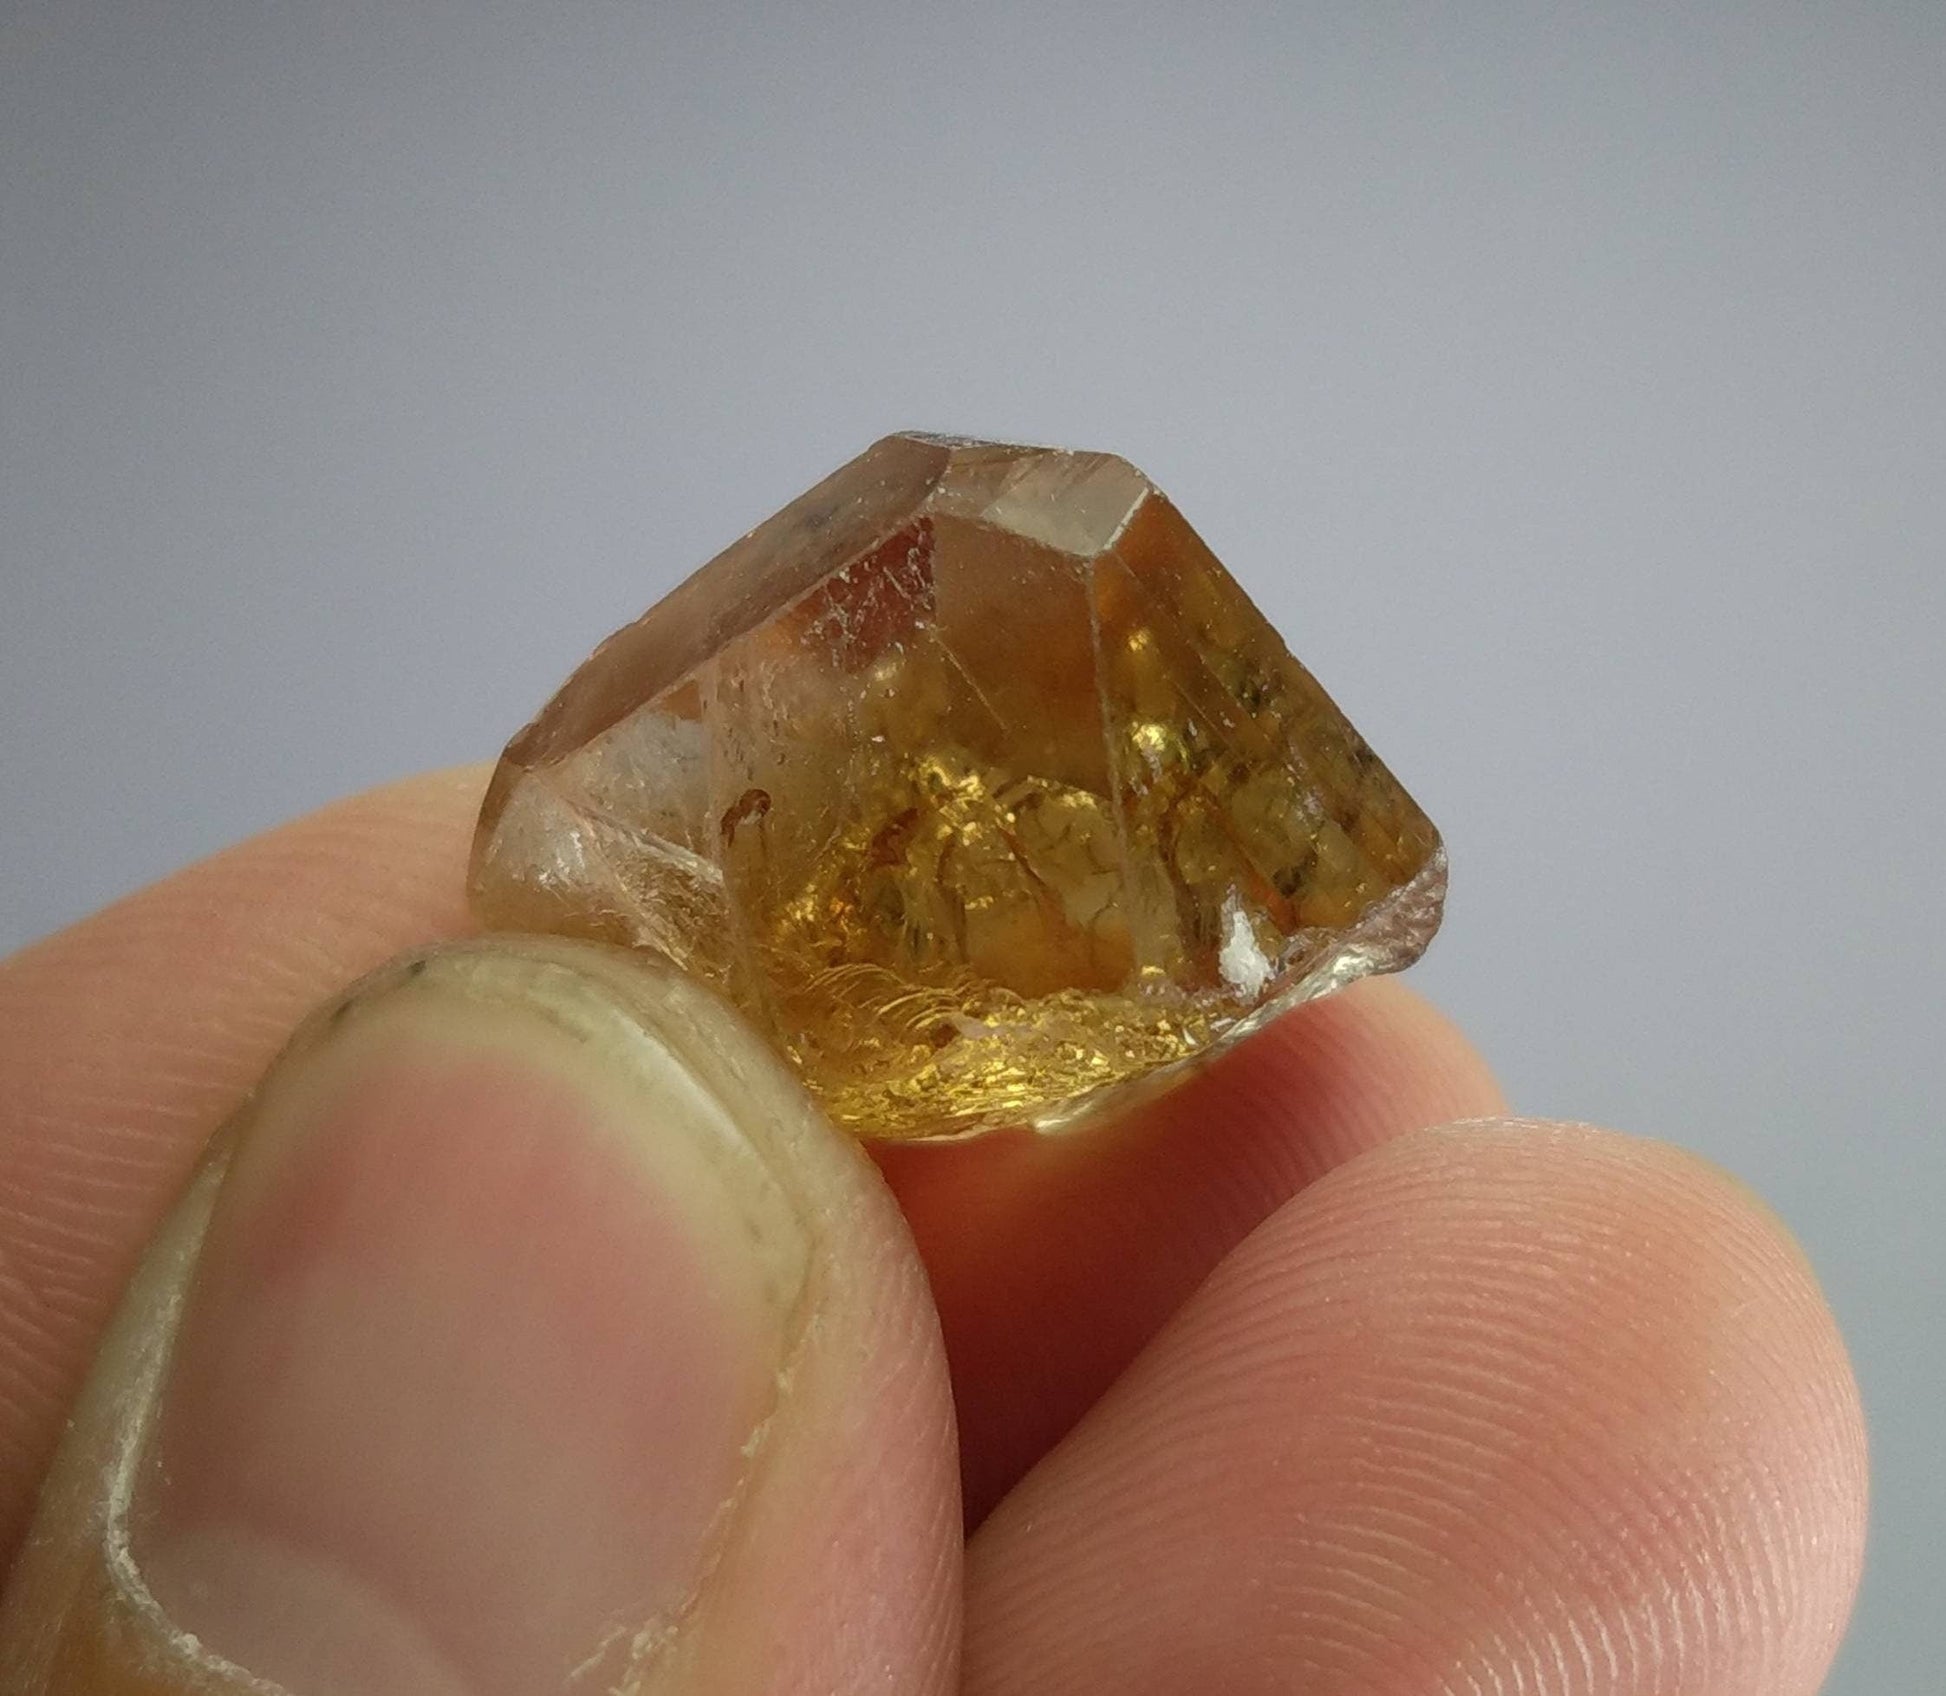 ARSAA GEMS AND MINERALSNatural fine quality beautiful 6.2 grams terminated heated topaz crystal - Premium  from ARSAA GEMS AND MINERALS - Just $10.00! Shop now at ARSAA GEMS AND MINERALS